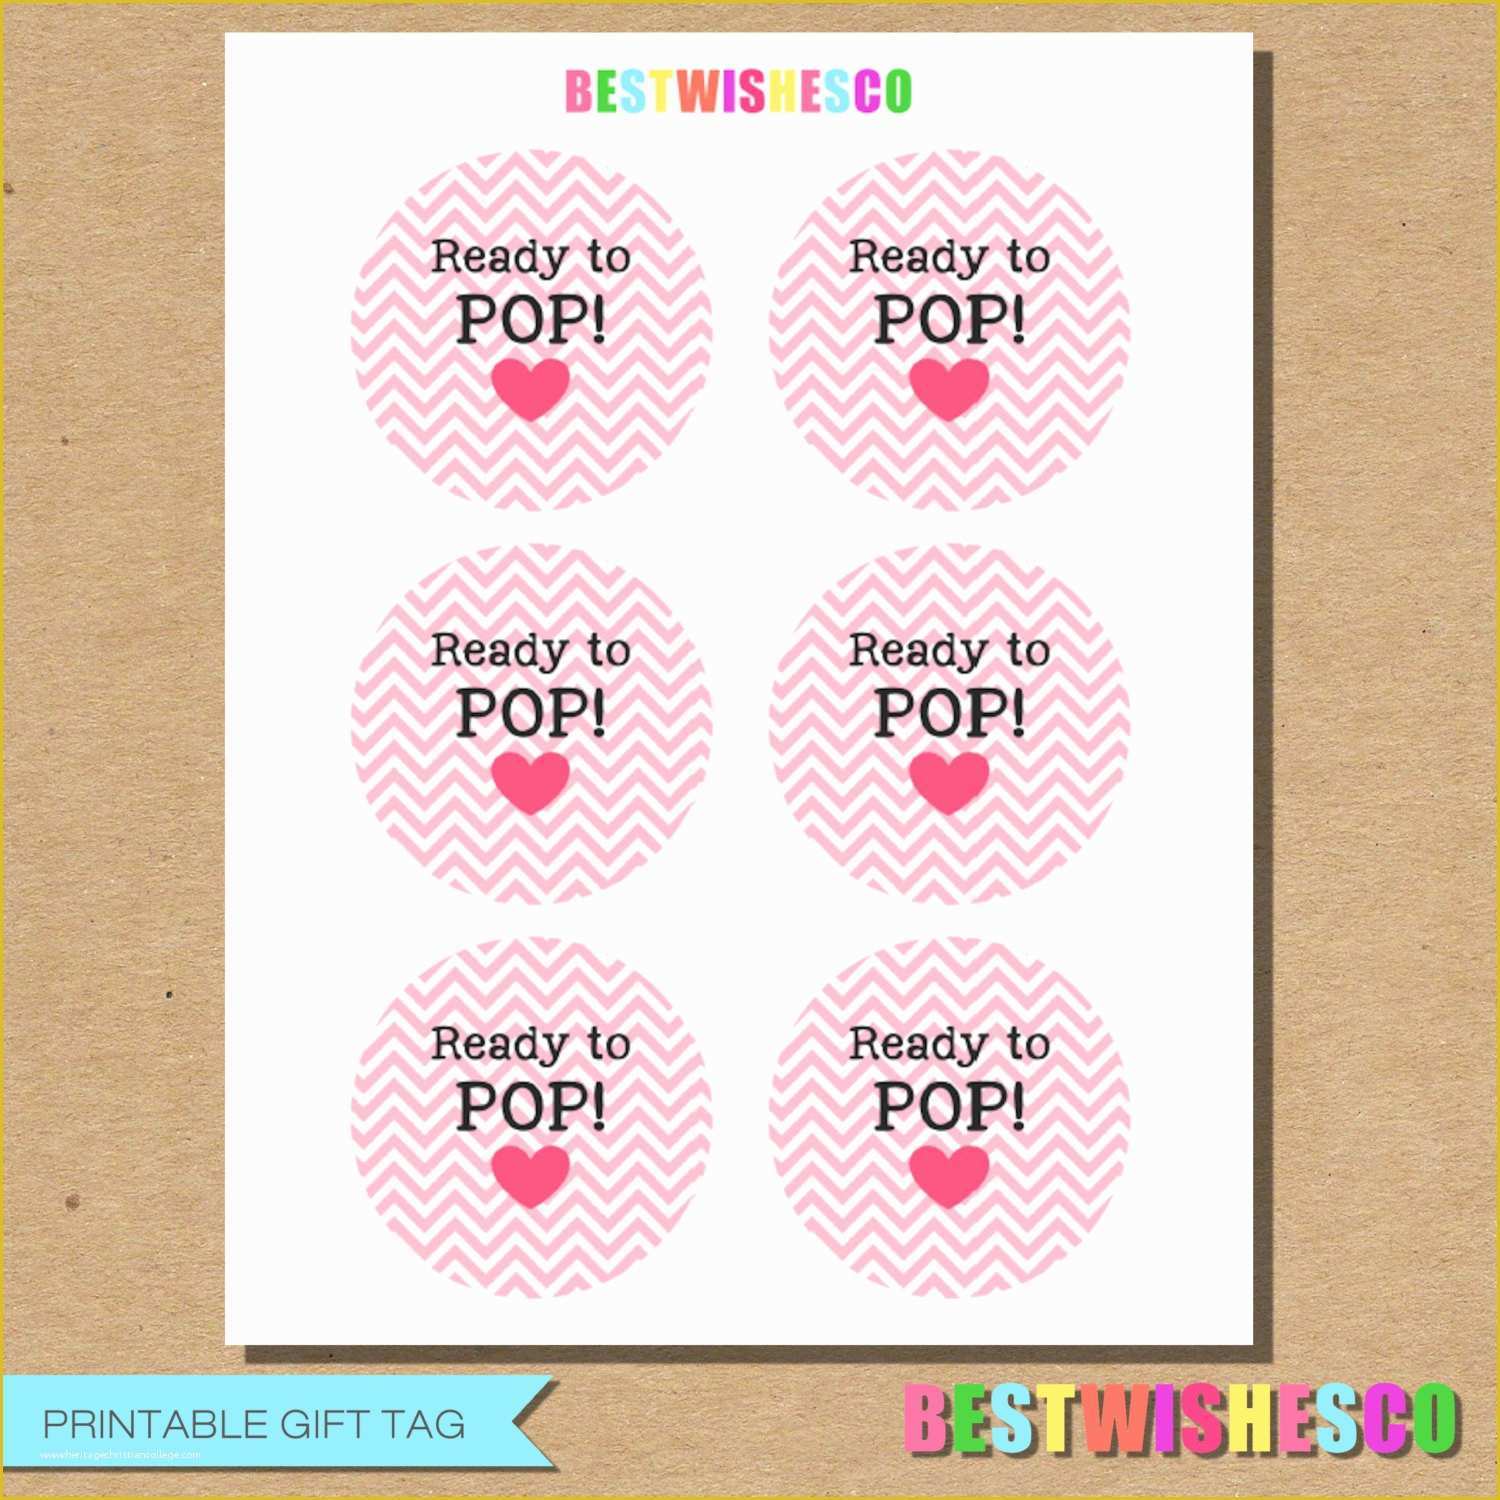 Ready to Pop Labels Template Free Of Ready to Pop Printable Gift Tags Chevron Stickers Baby Shower